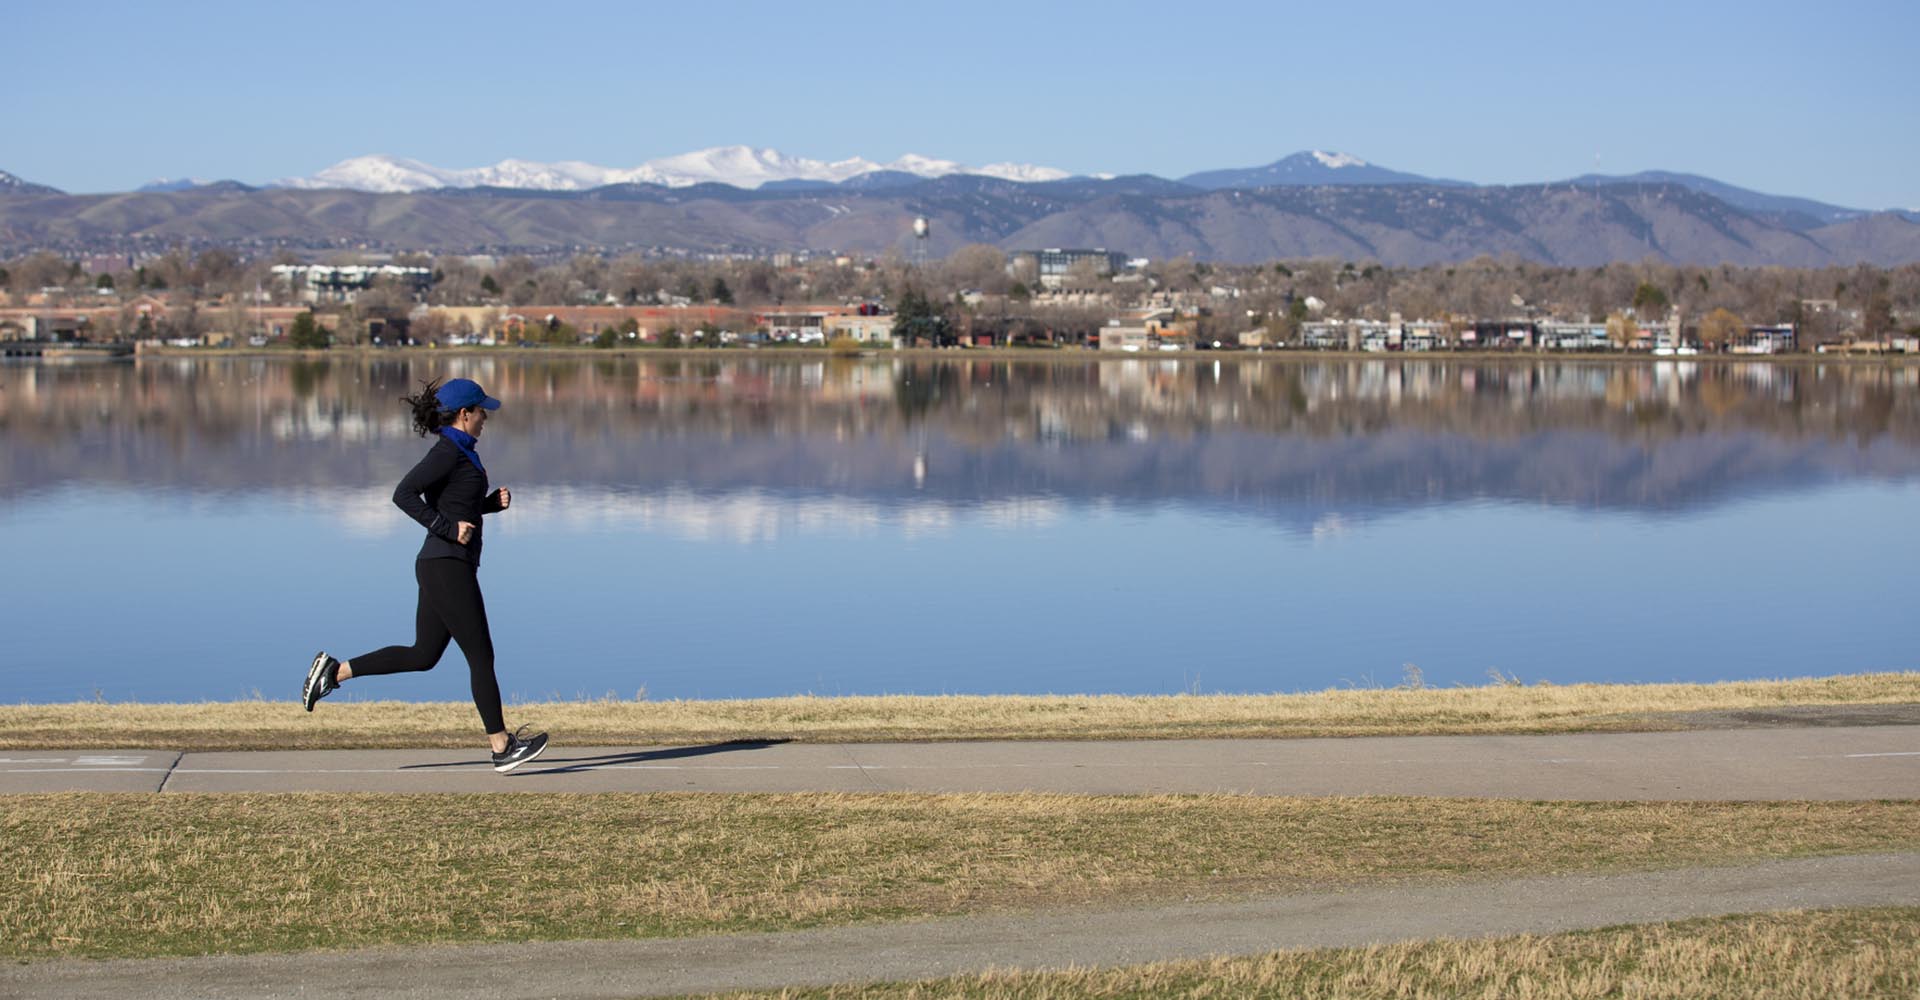 How to exercise outside during COVID-19 outbreak